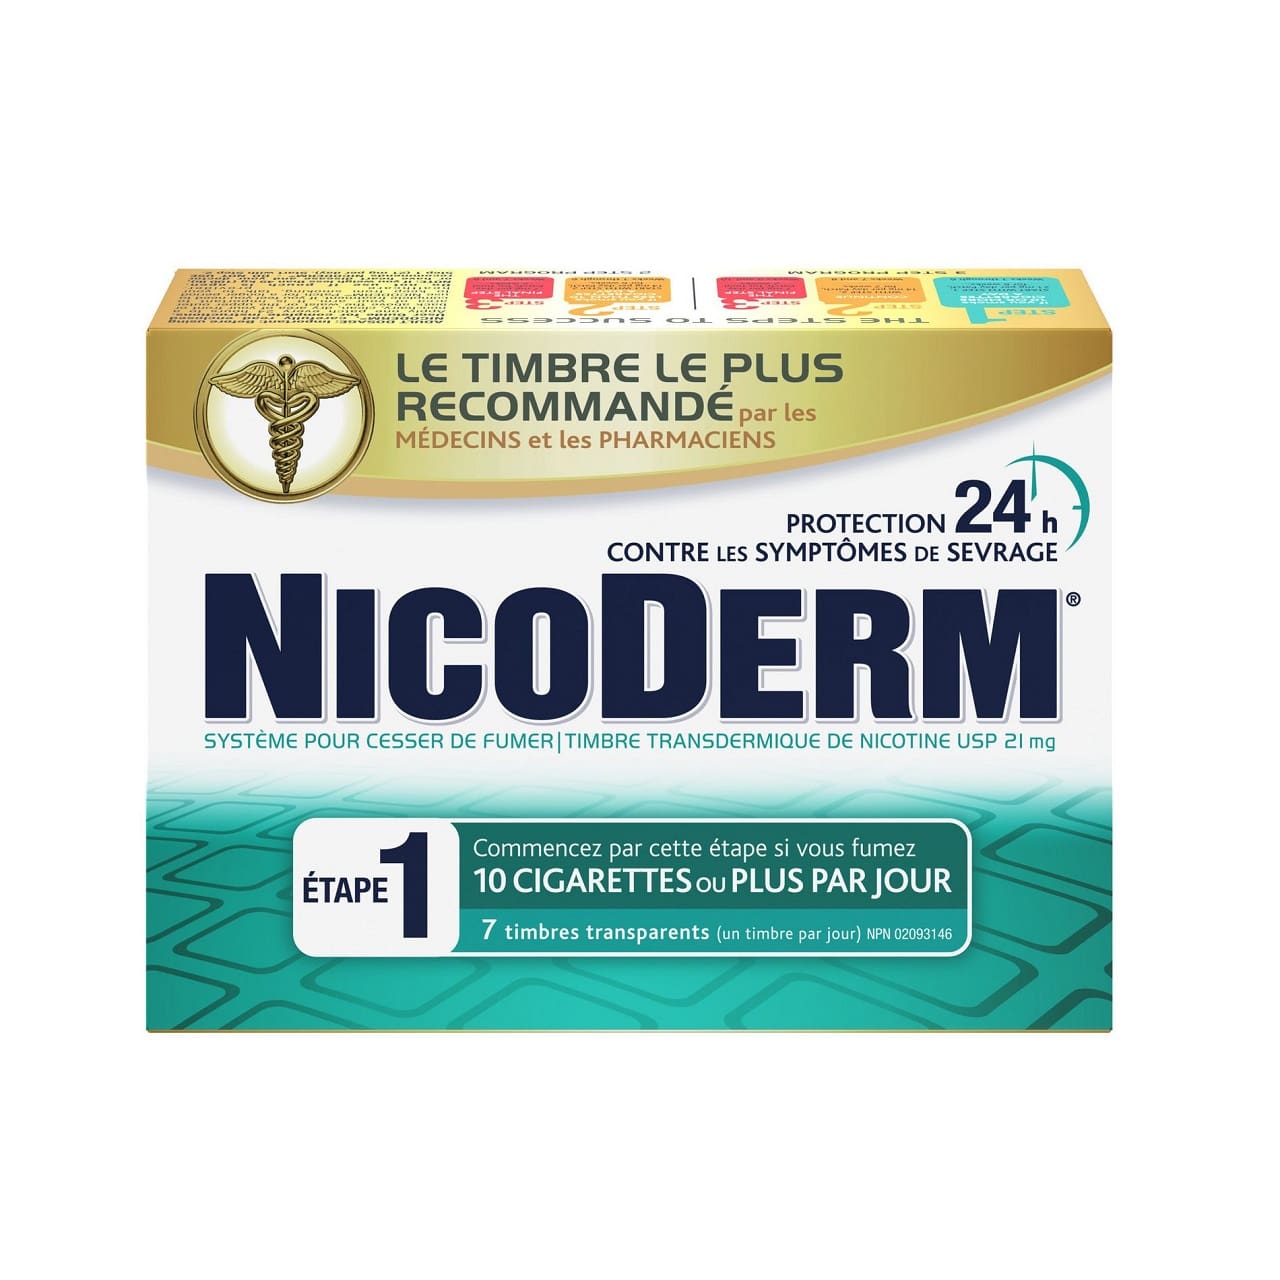 Product label for Nicoderm Step 1 Clear Nicotine Patches (7 count) in French